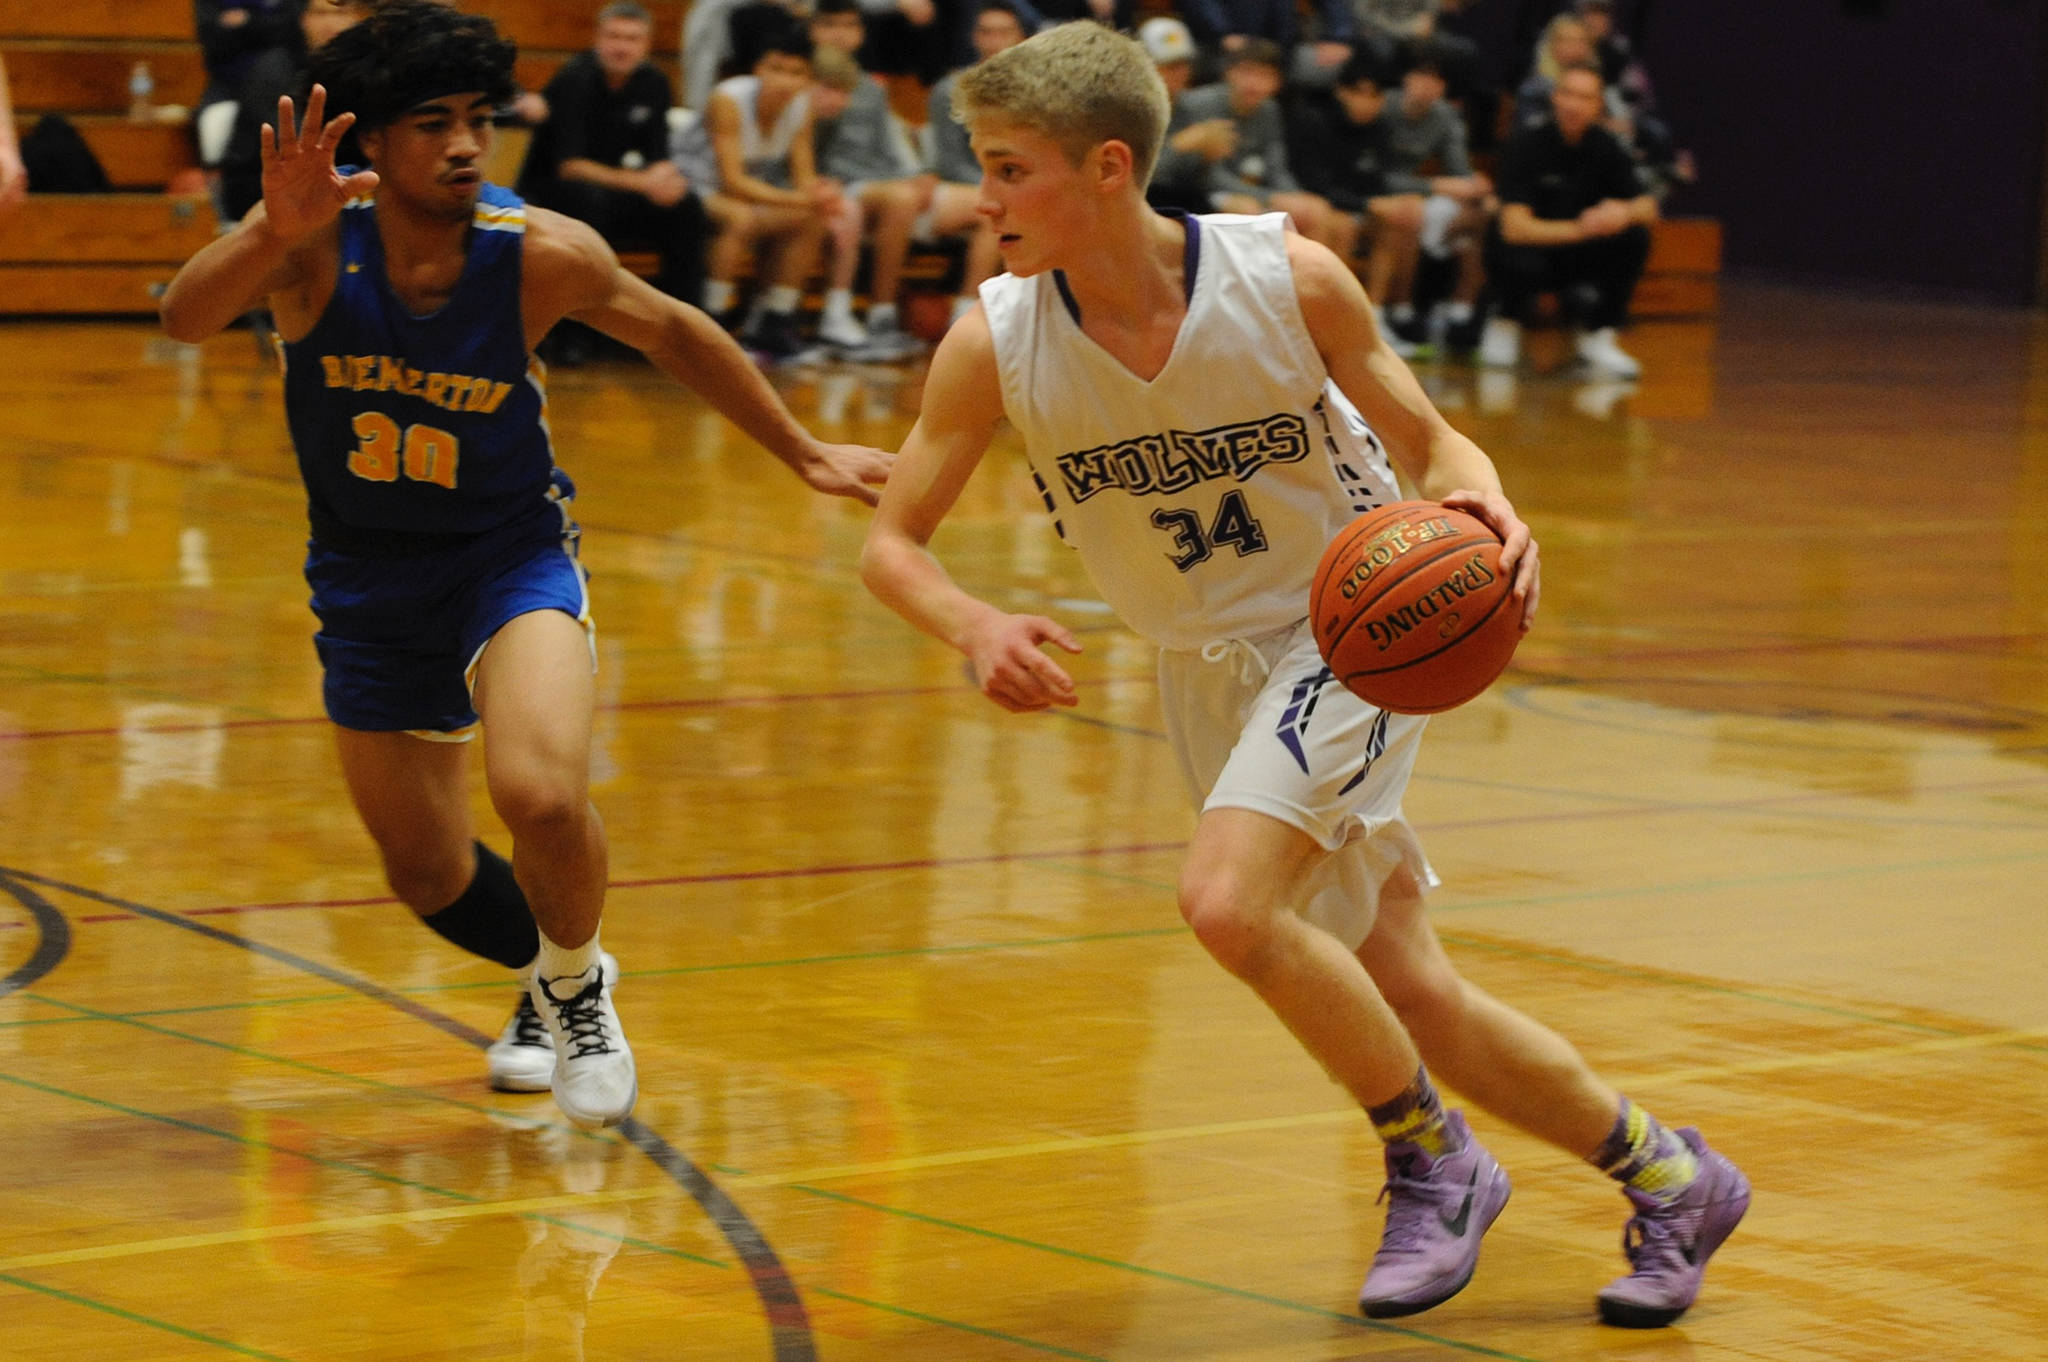 Erik Christiansen, 34, pictured playing against the Bremerton Knights on Dec. 17, lead the Wolves in scoring at the Cloud 9 Classic in Lynden with 38 points, including scoring 27 against the Sehome Mariners on Dec. 28. Sequim Gazette file photo by Conor Dowley